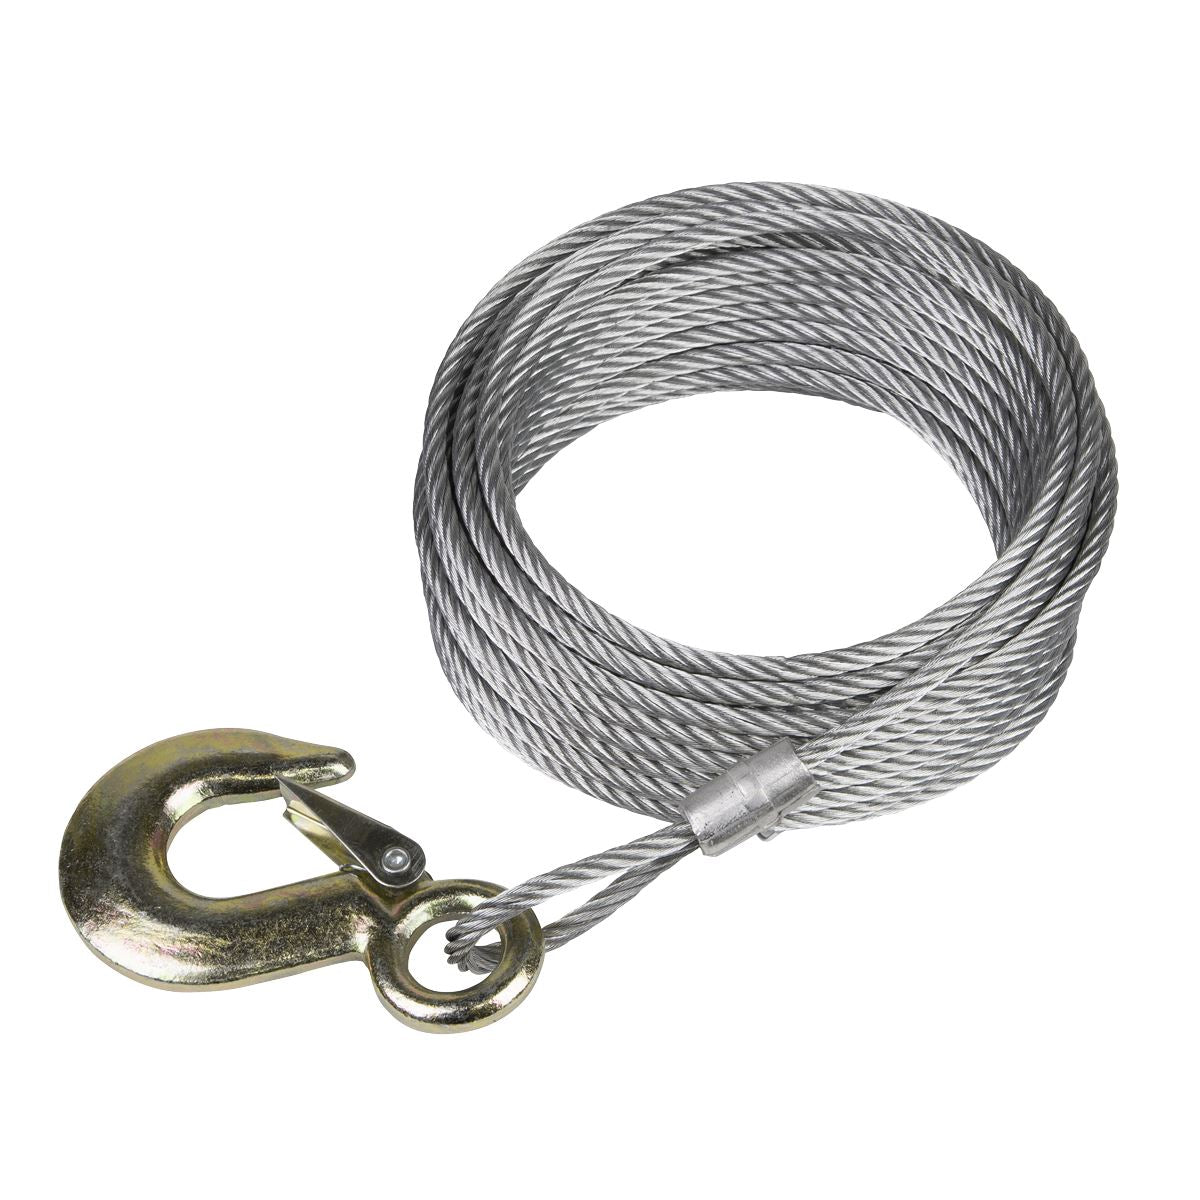 Sealey Winch Cable/Wire Rope Ø5.1mm x 10m 1350kg Breaking Strength with Forged Hook